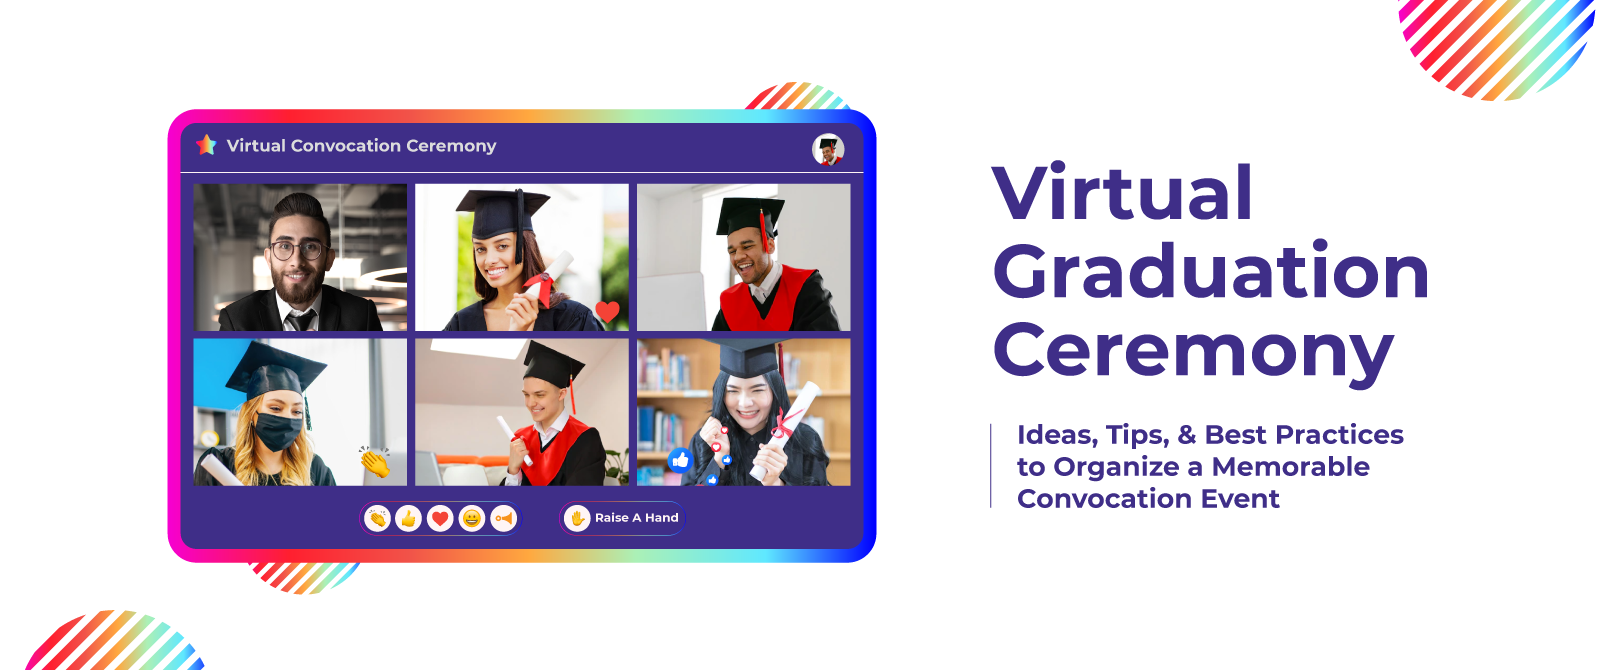 Virtual Graduation Ceremony – Ideas, Tips, & Best Practices to Organize a Memorable Convocation Event